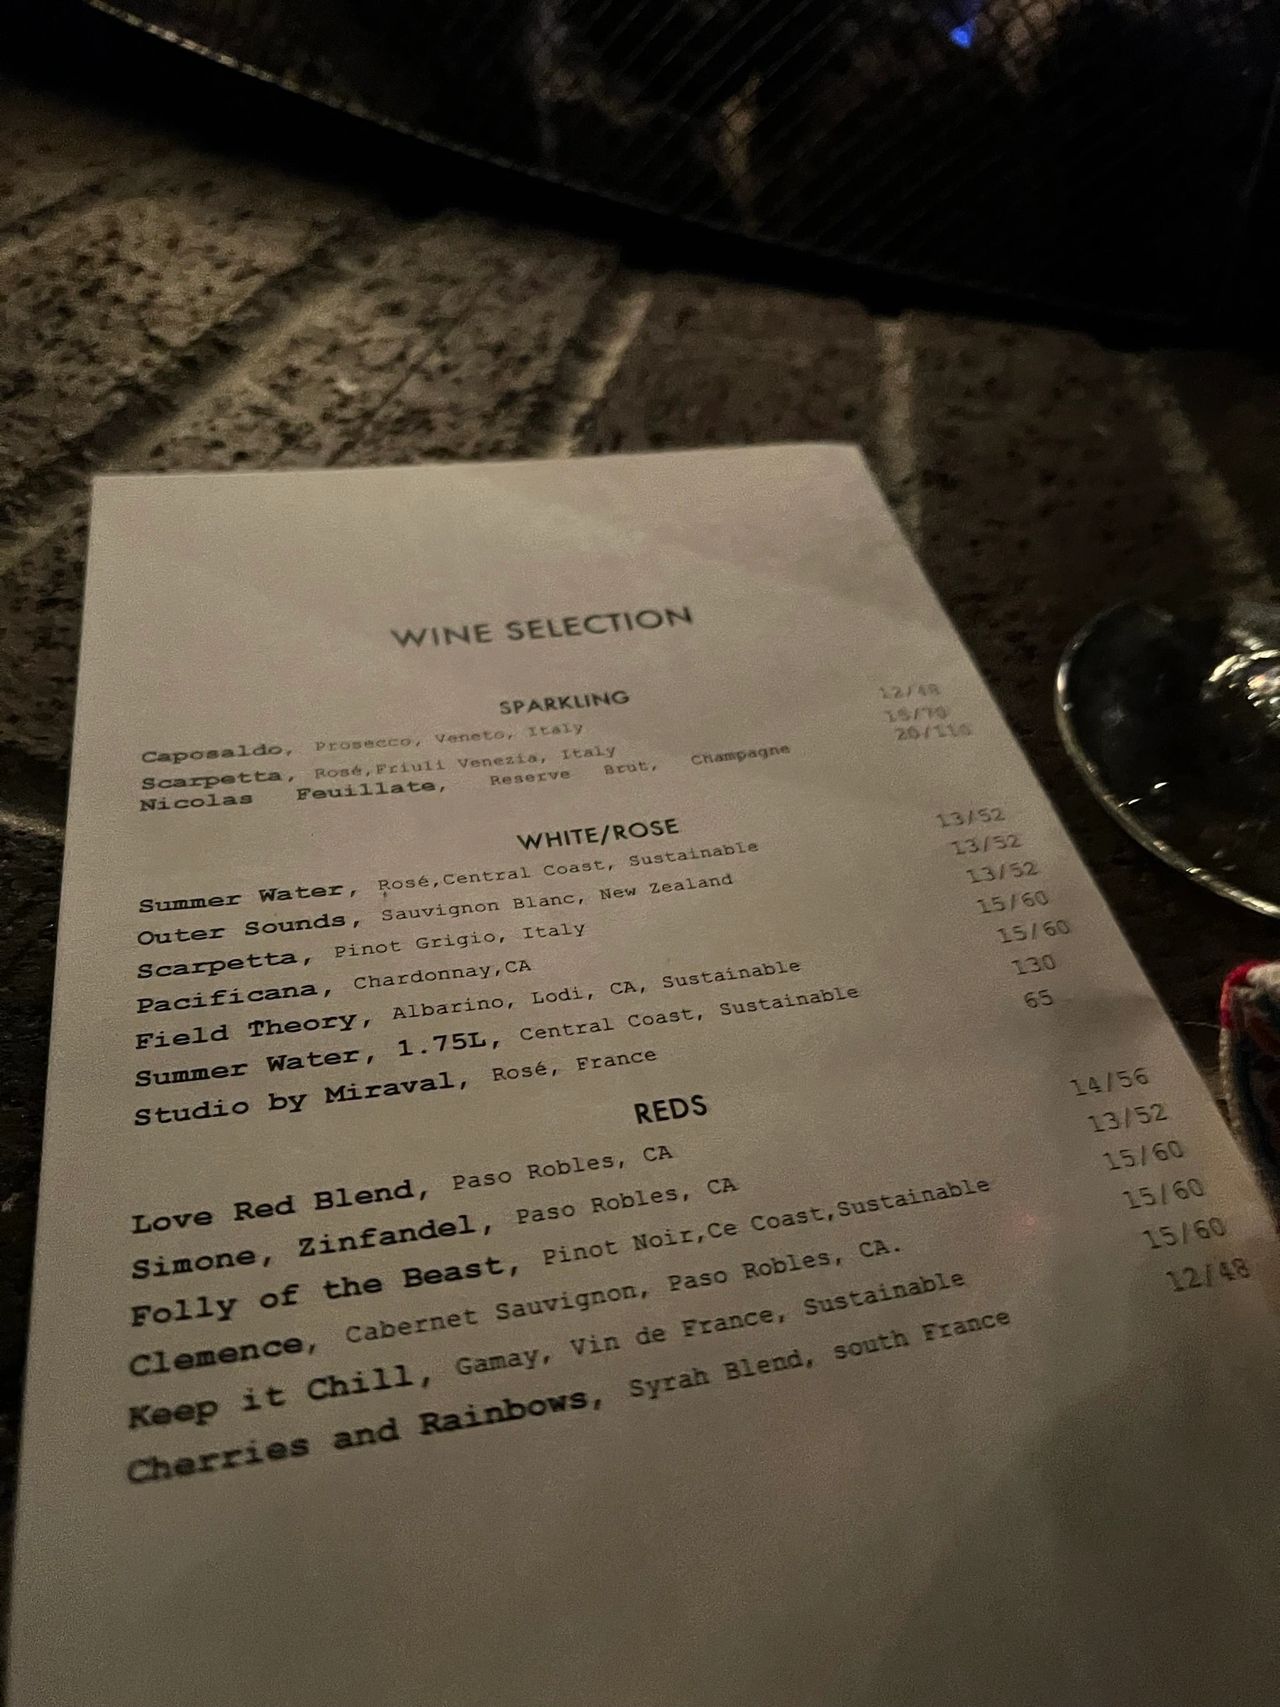 The wine selection at The Bungalow